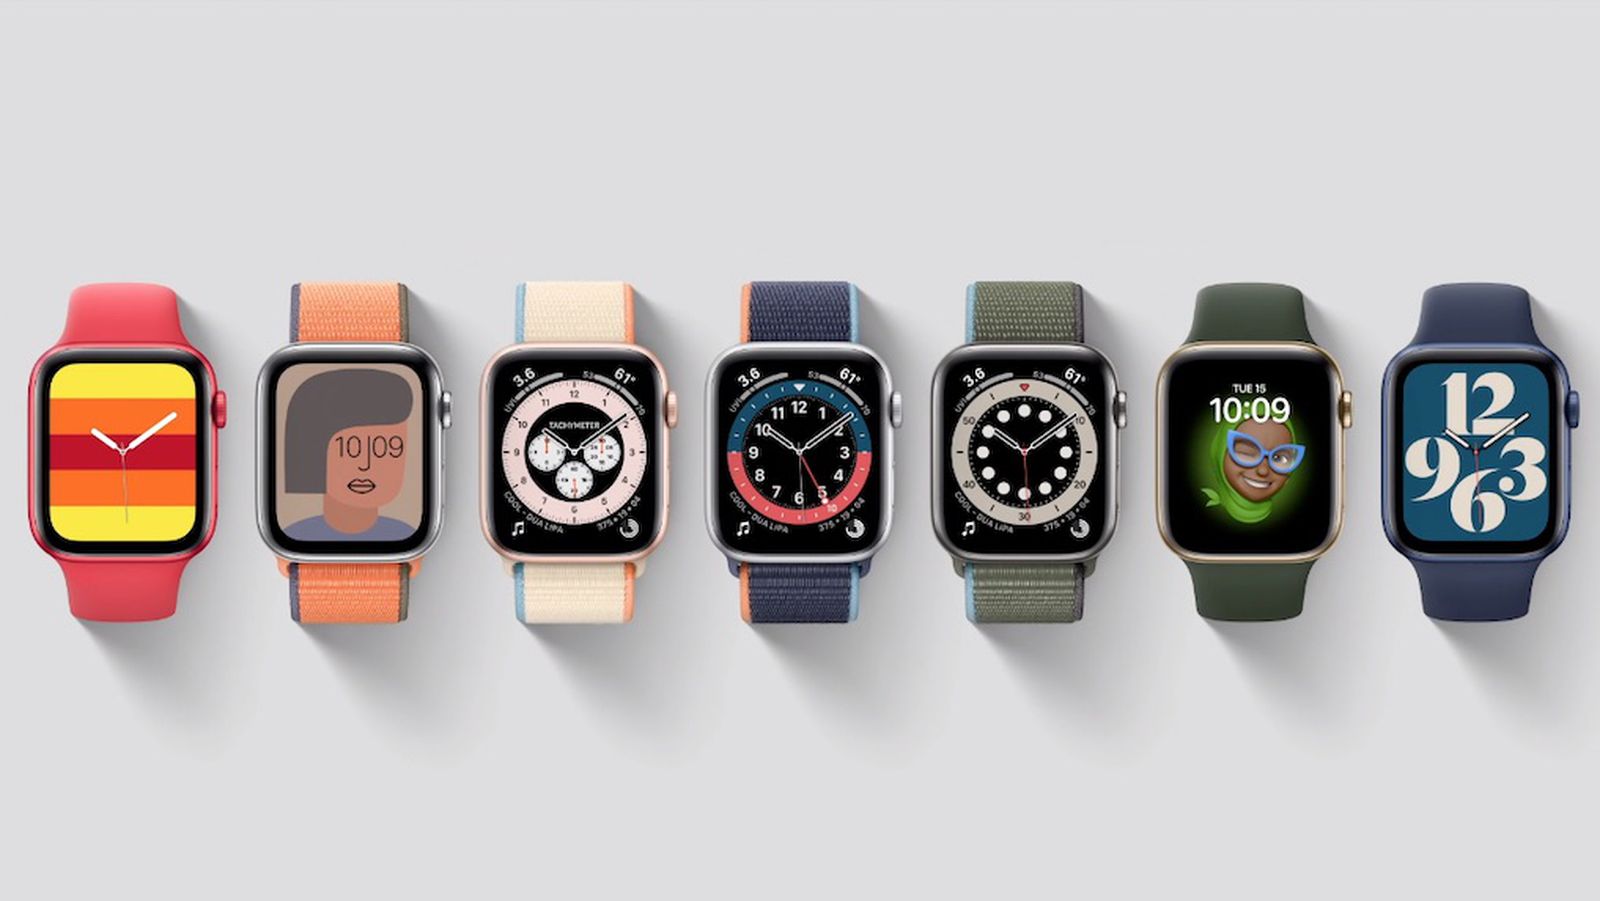 Apple Watch Series 6 Features New Watch Faces With Memoji, Stripes, and  More - MacRumors